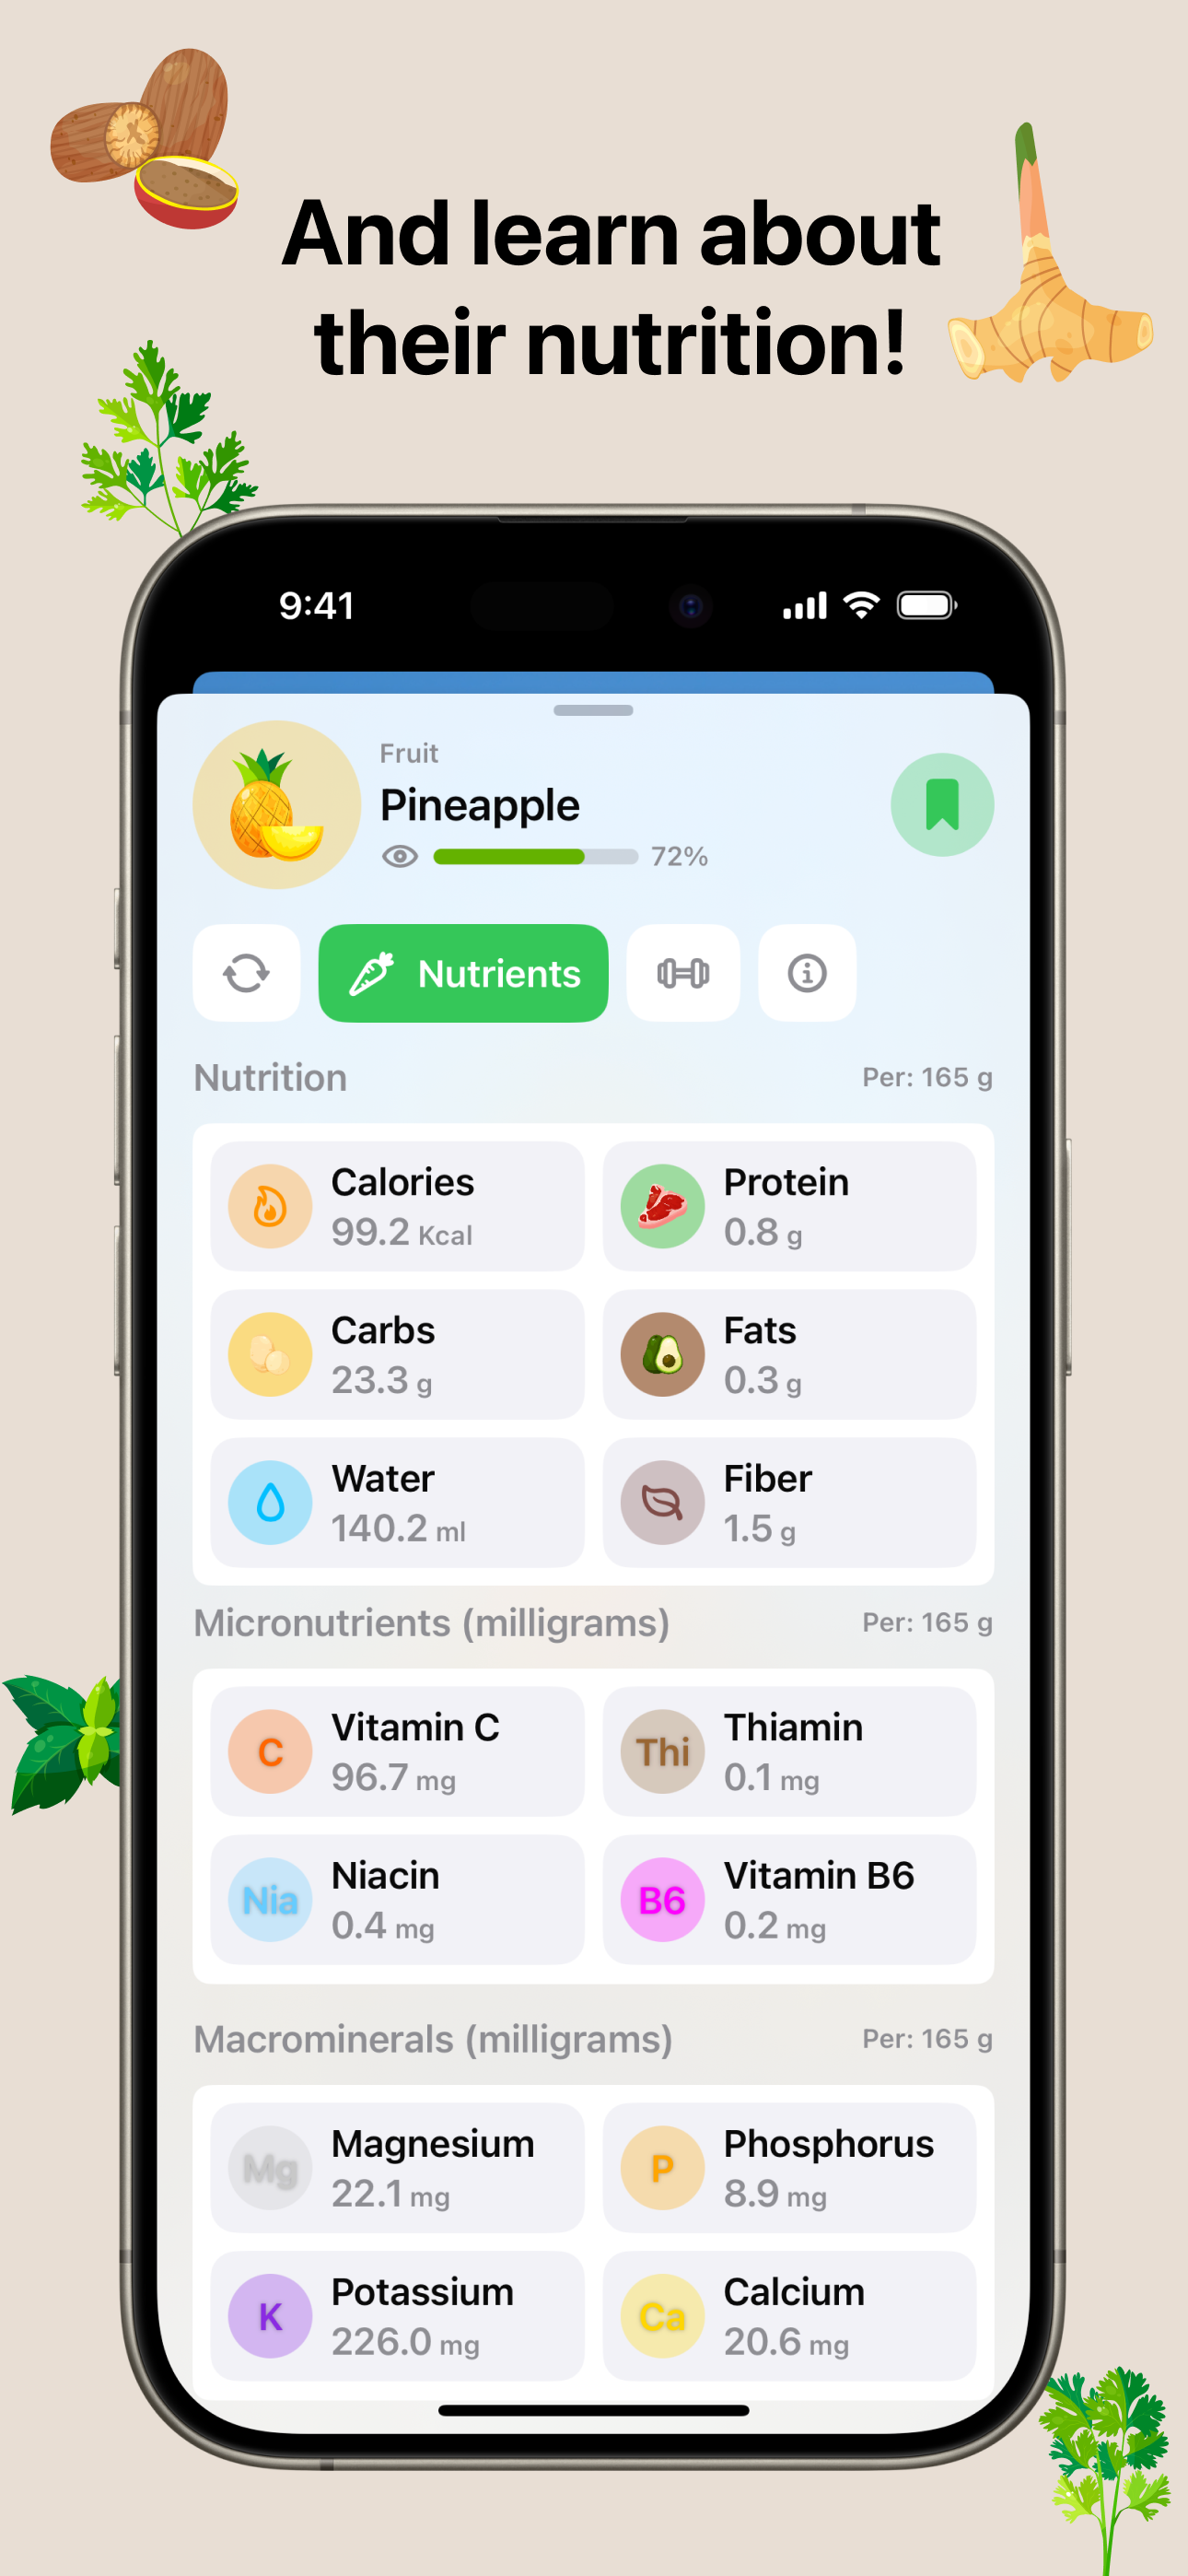 Nutrify app screenshot: A smartphone screen displaying detailed nutritional information for a pineapple with the title 'And learn about their nutrition!' The pineapple is identified as a fruit with 72% accuracy. Nutritional values per 165g serving are shown: 99.2 kcal, 0.8g protein, 23.3g carbs, 0.3g fats, 140.2ml water, and 1.5g fiber. Micronutrients include Vitamin C (96.7mg), Thiamin (0.1mg), Niacin (0.4mg), and Vitamin B6 (0.2mg). Macronutrients include Magnesium (22.1mg), Phosphorus (8.9mg), Potassium (226.0mg), and Calcium (20.6mg). The background is beige with various herb and spice icons.